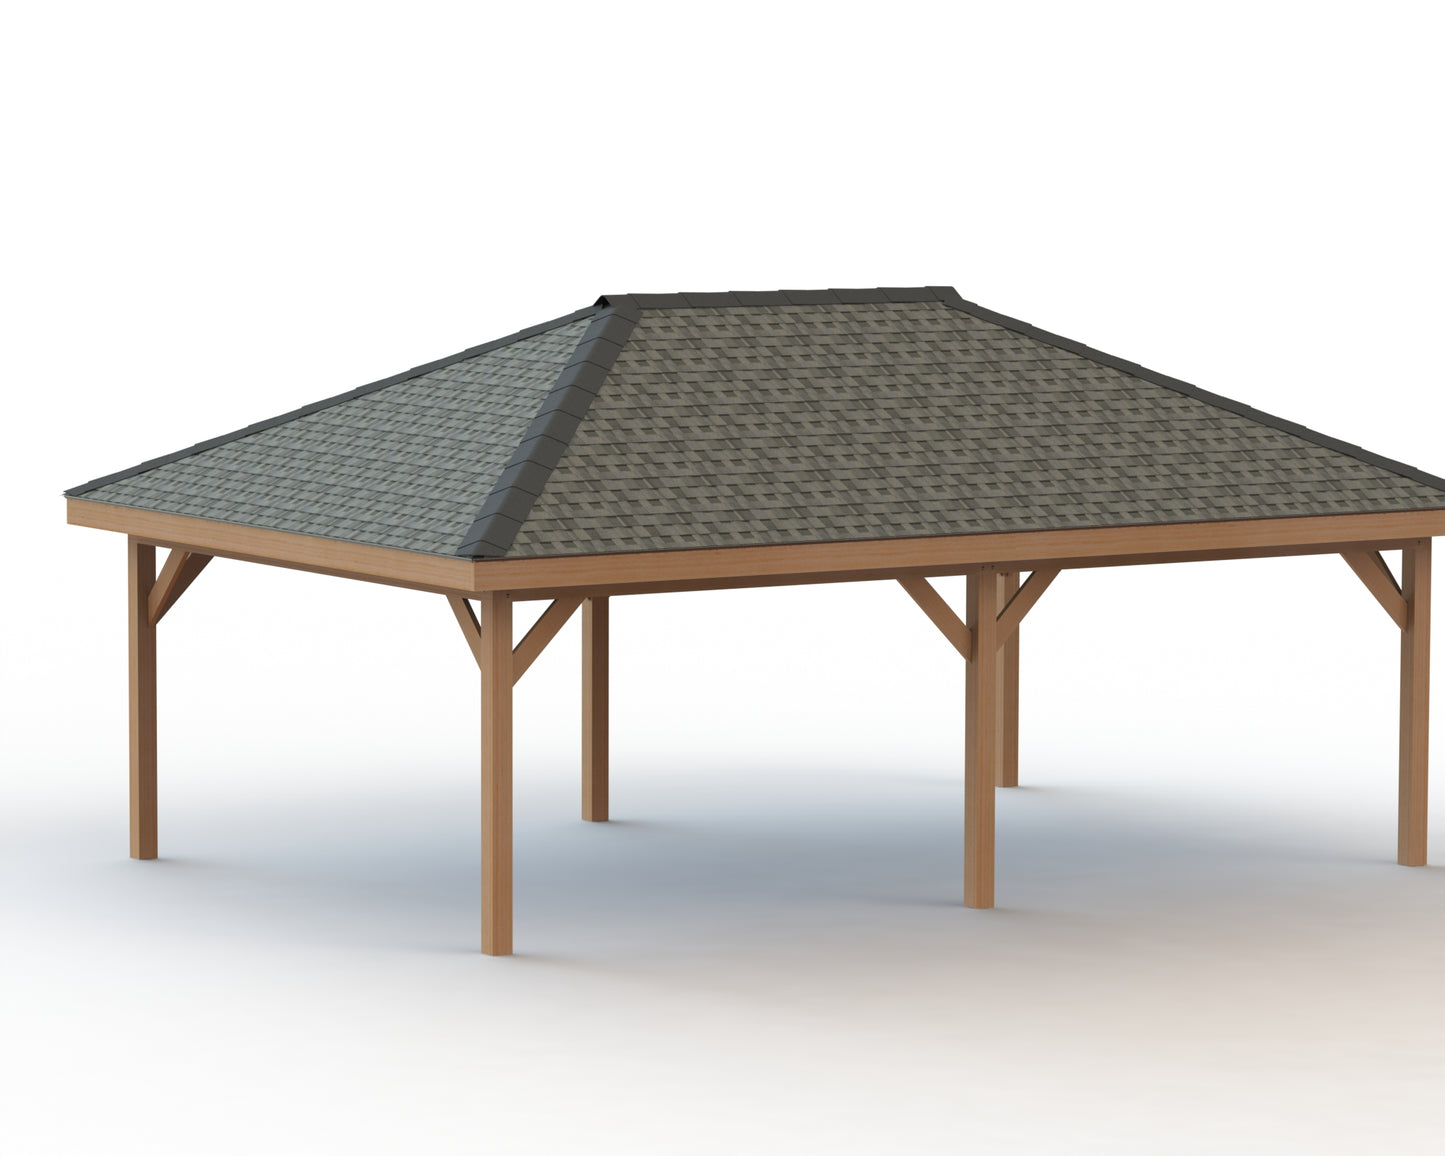 Hip Roof Gazebo Building Plans-Perfect for Hot Tubs - 8' x 18'